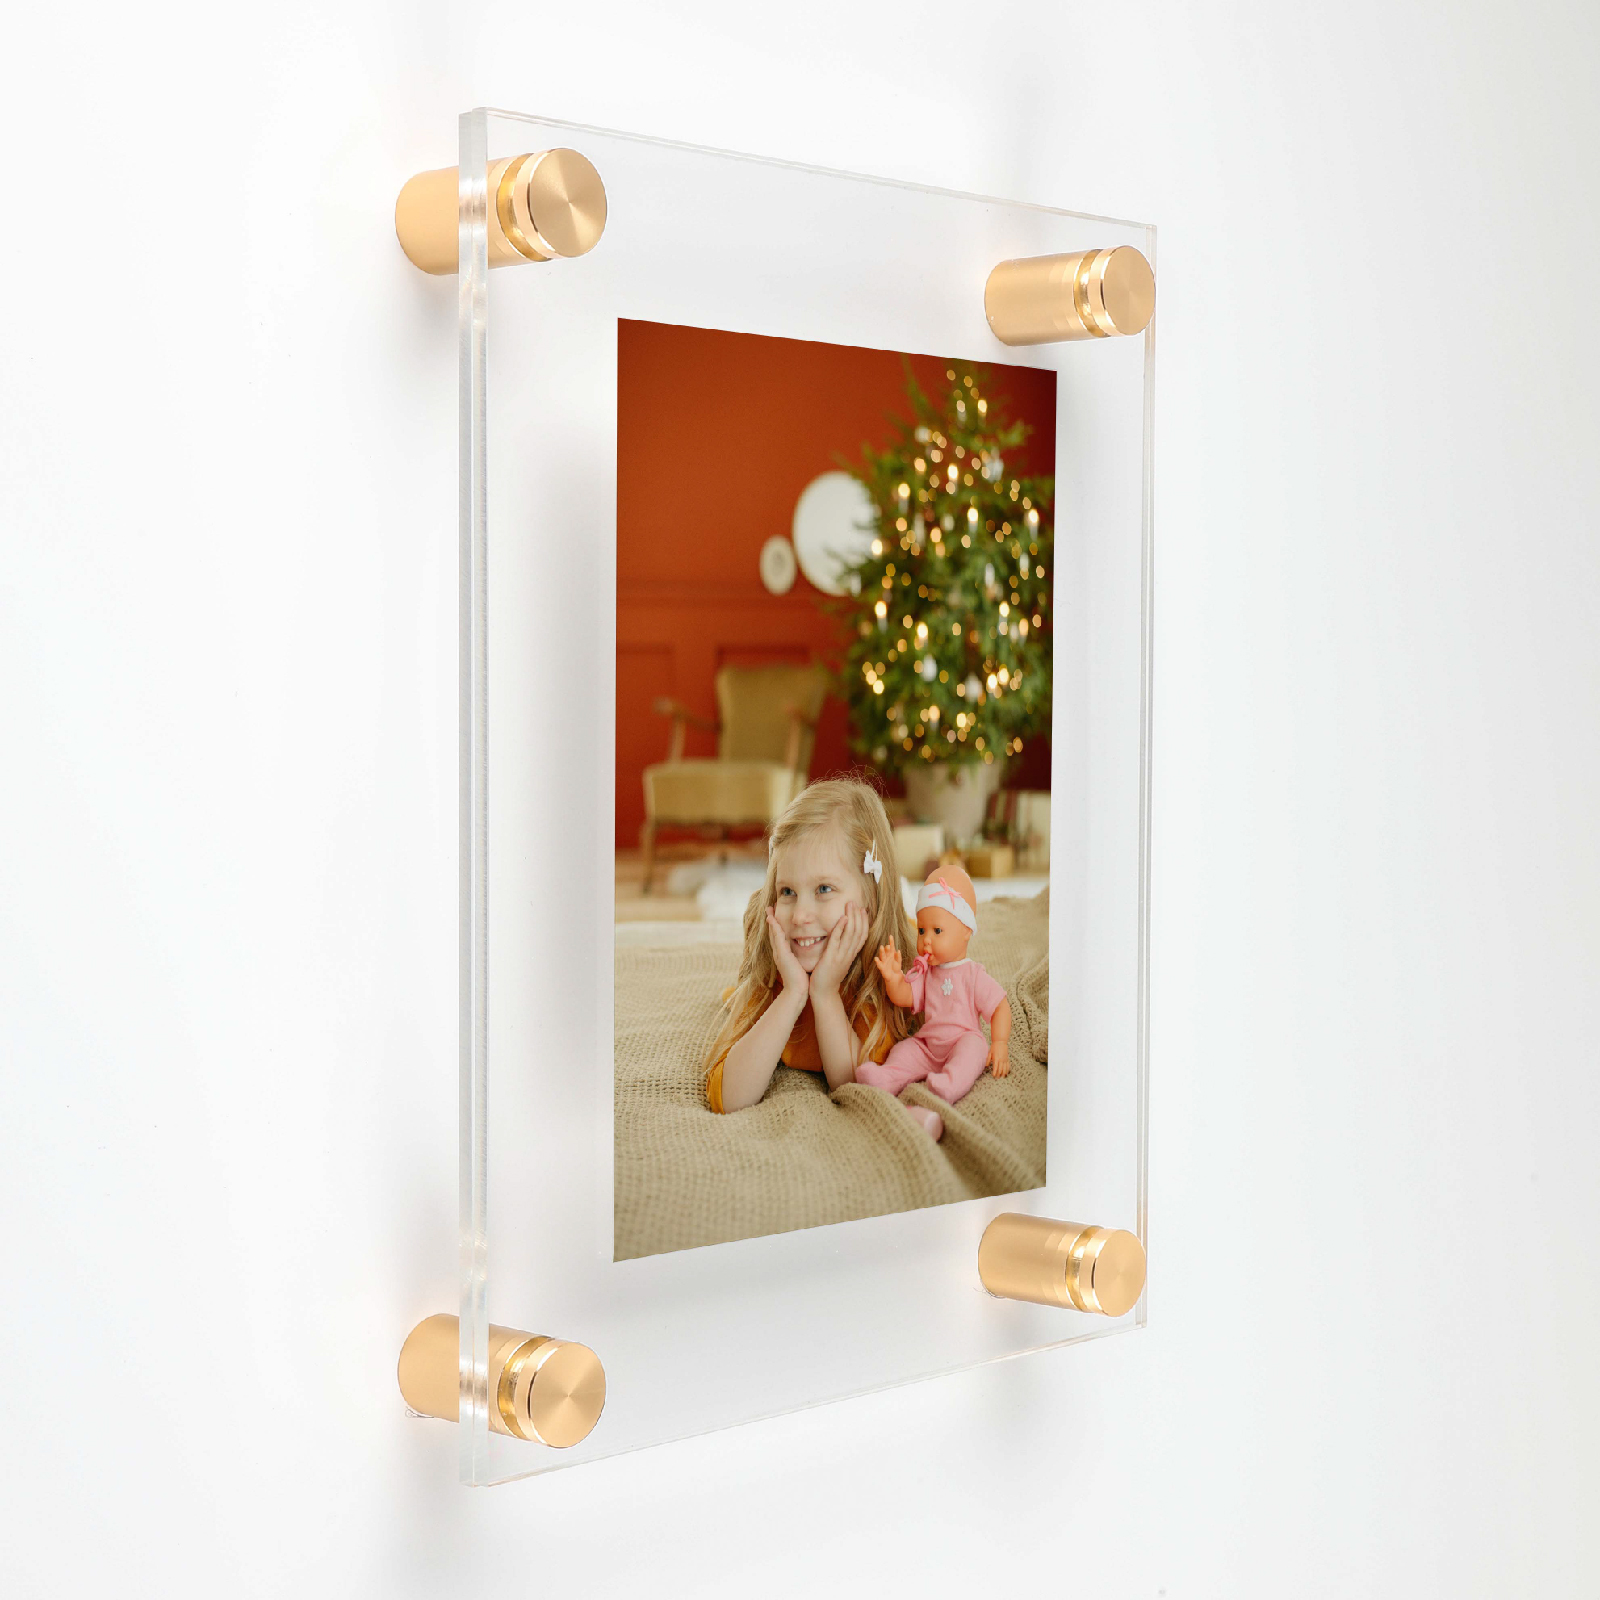 (2) 7-1/2'' x 9-1/2'' Clear Acrylics , Pre-Drilled With Polished Edges (Thick 1/8'' each), Wall Frame with (4) 5/8'' x 1'' Champagne Anodized Aluminum Standoffs includes Screws and Anchors